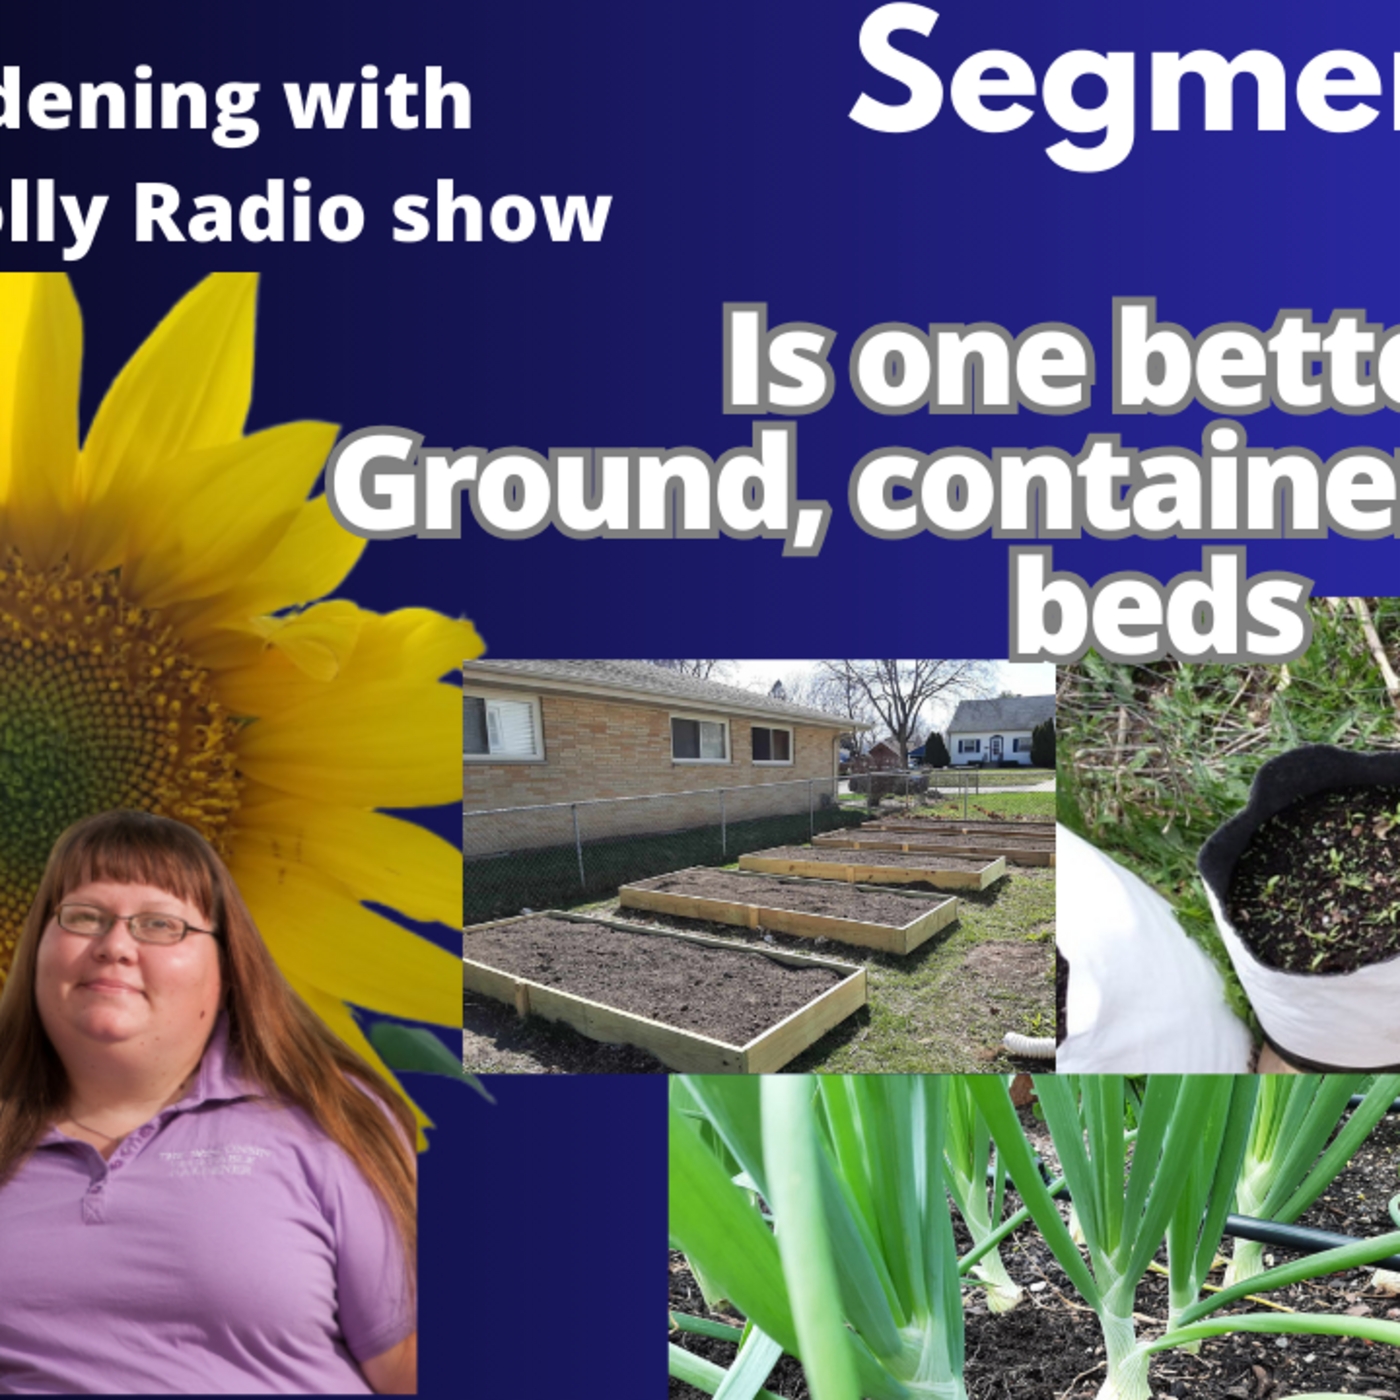 Episode 1203: Seg 2 of S8E10 is one garden method better than others?  - The Gardening with Joey and Holly Radio Show